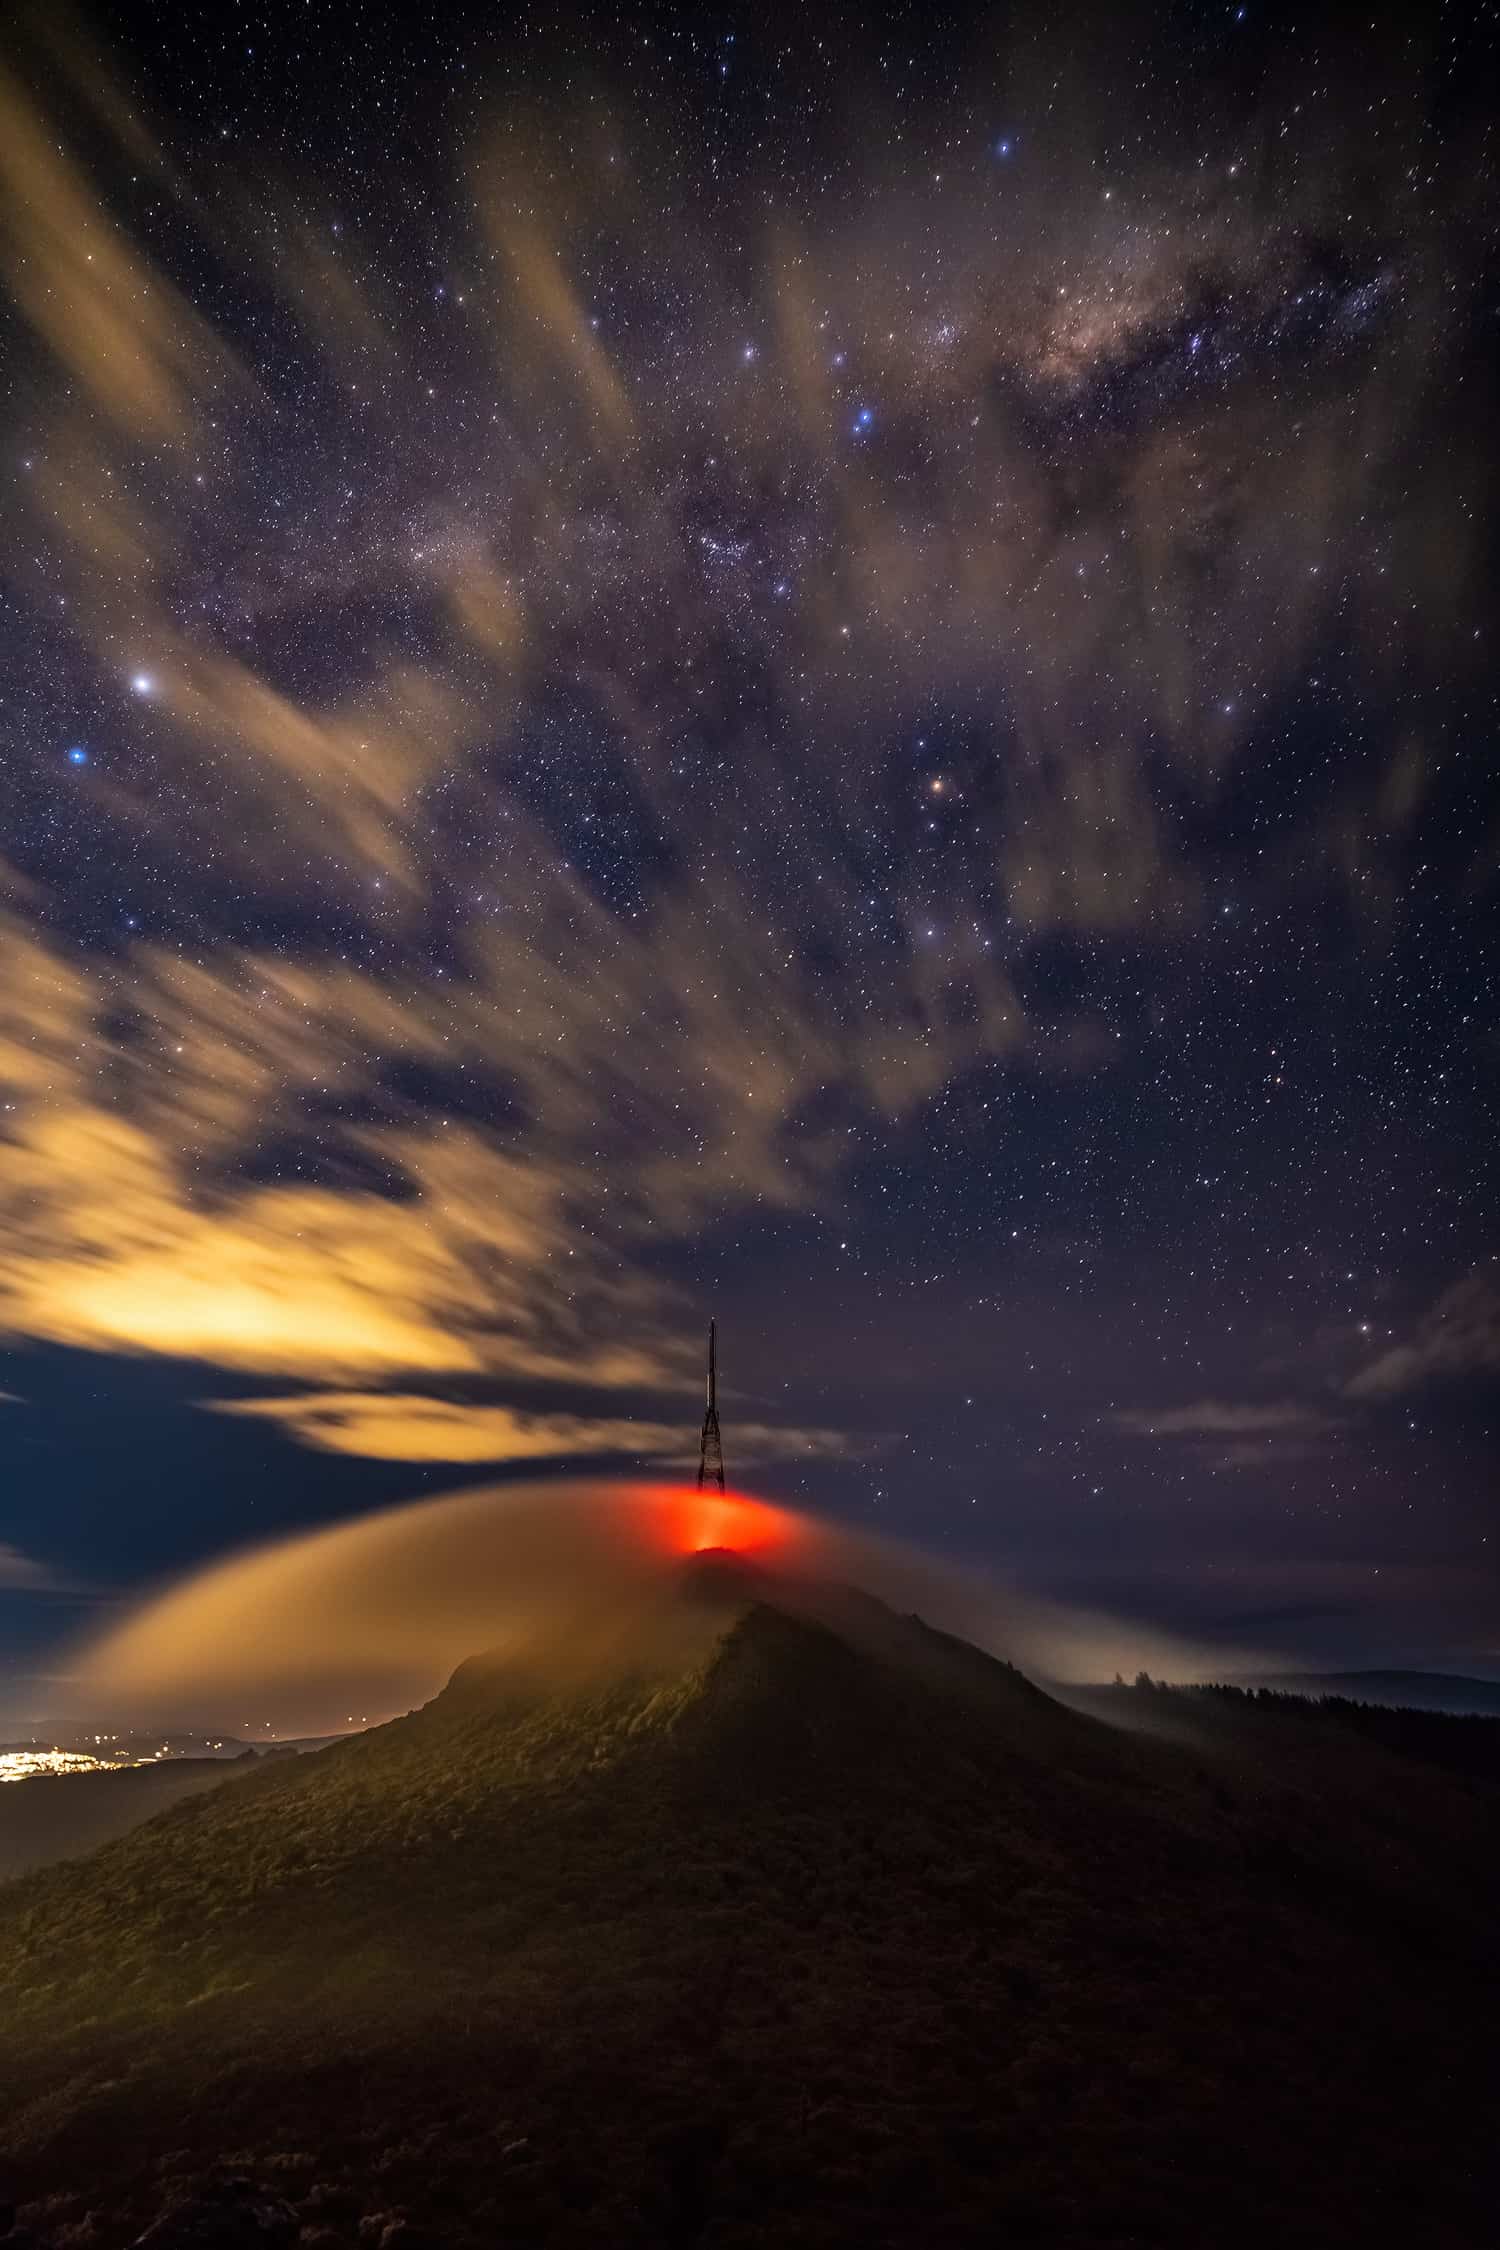 Red glow from the Mt Cargill communications tower shines through wind swept shield of cloud over the bush clad mountain. The lights of Dunedin city can be seen beyond and below the hill. Thi lights of the milky way above partially obscured by light cloud.